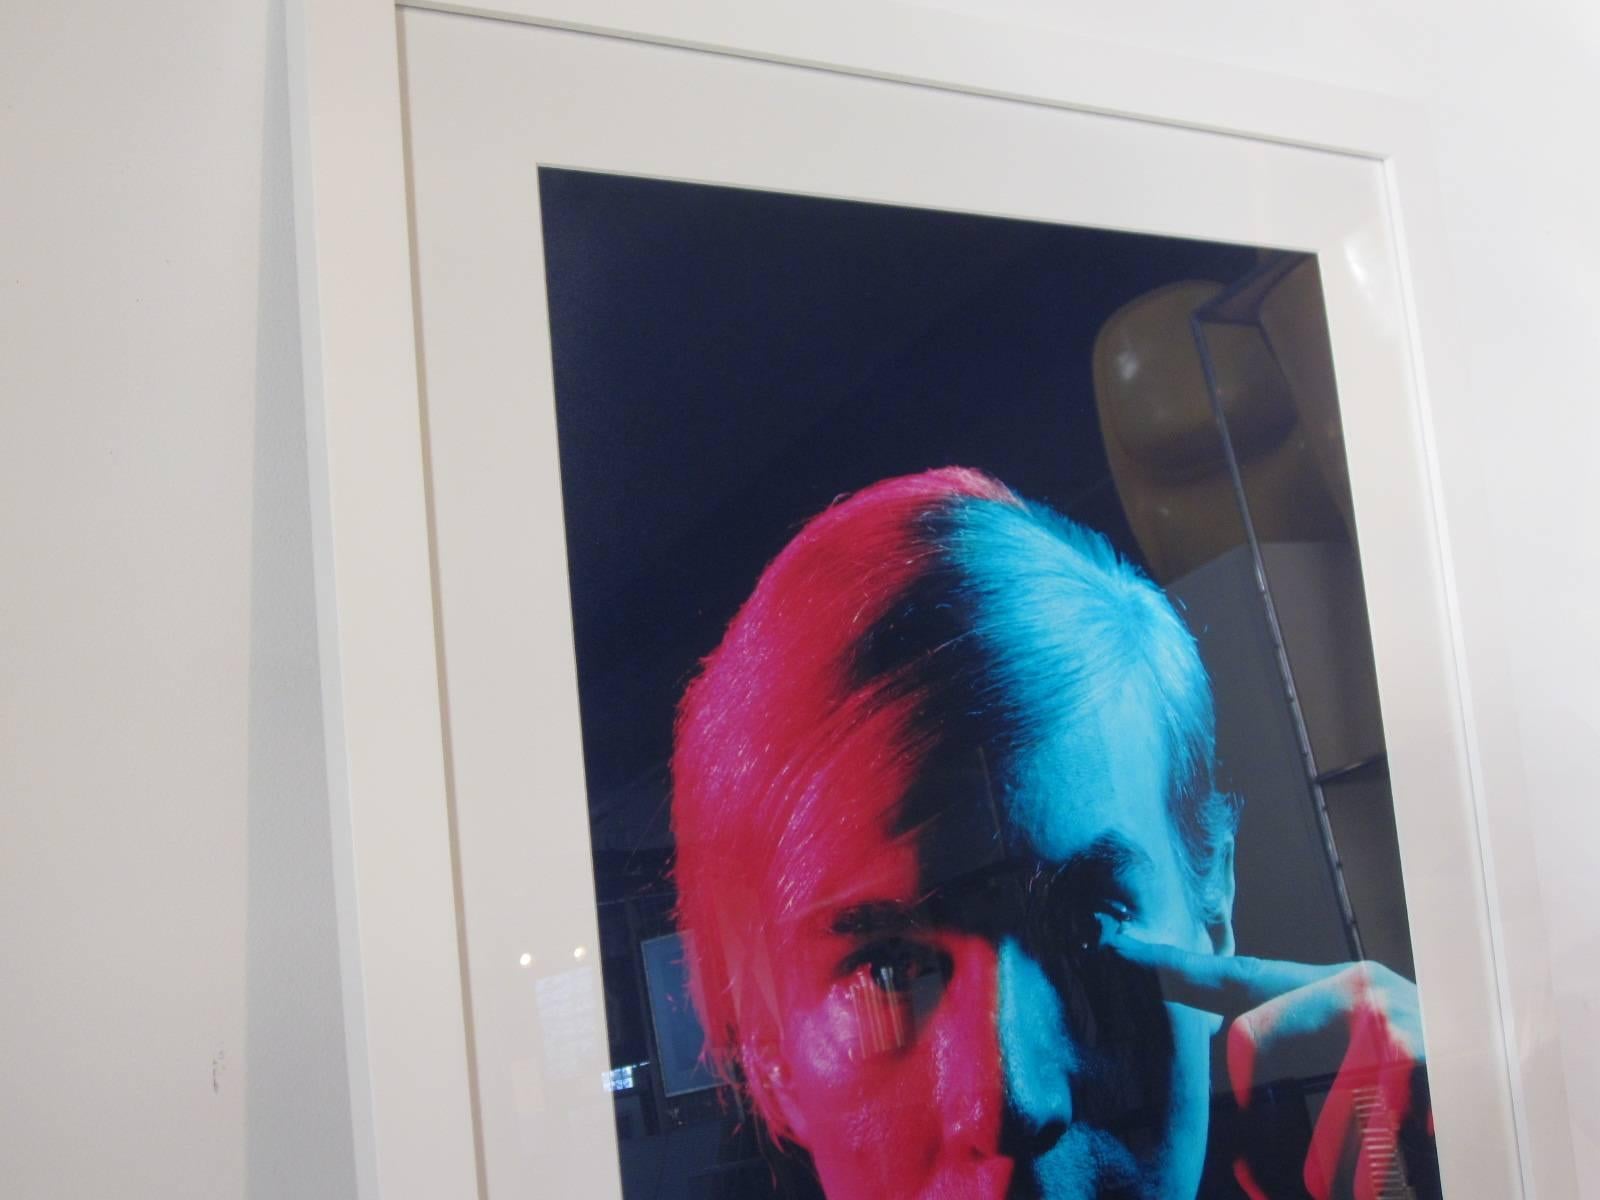 Andy Warhol portrait taken in 1968 by master photographer and printer Philippe Halsman (1906-1979) and in 1989 an edition of 100 portfolio of eight color chromogenic prints were done which sold out. This print is a proof from the artist archive.